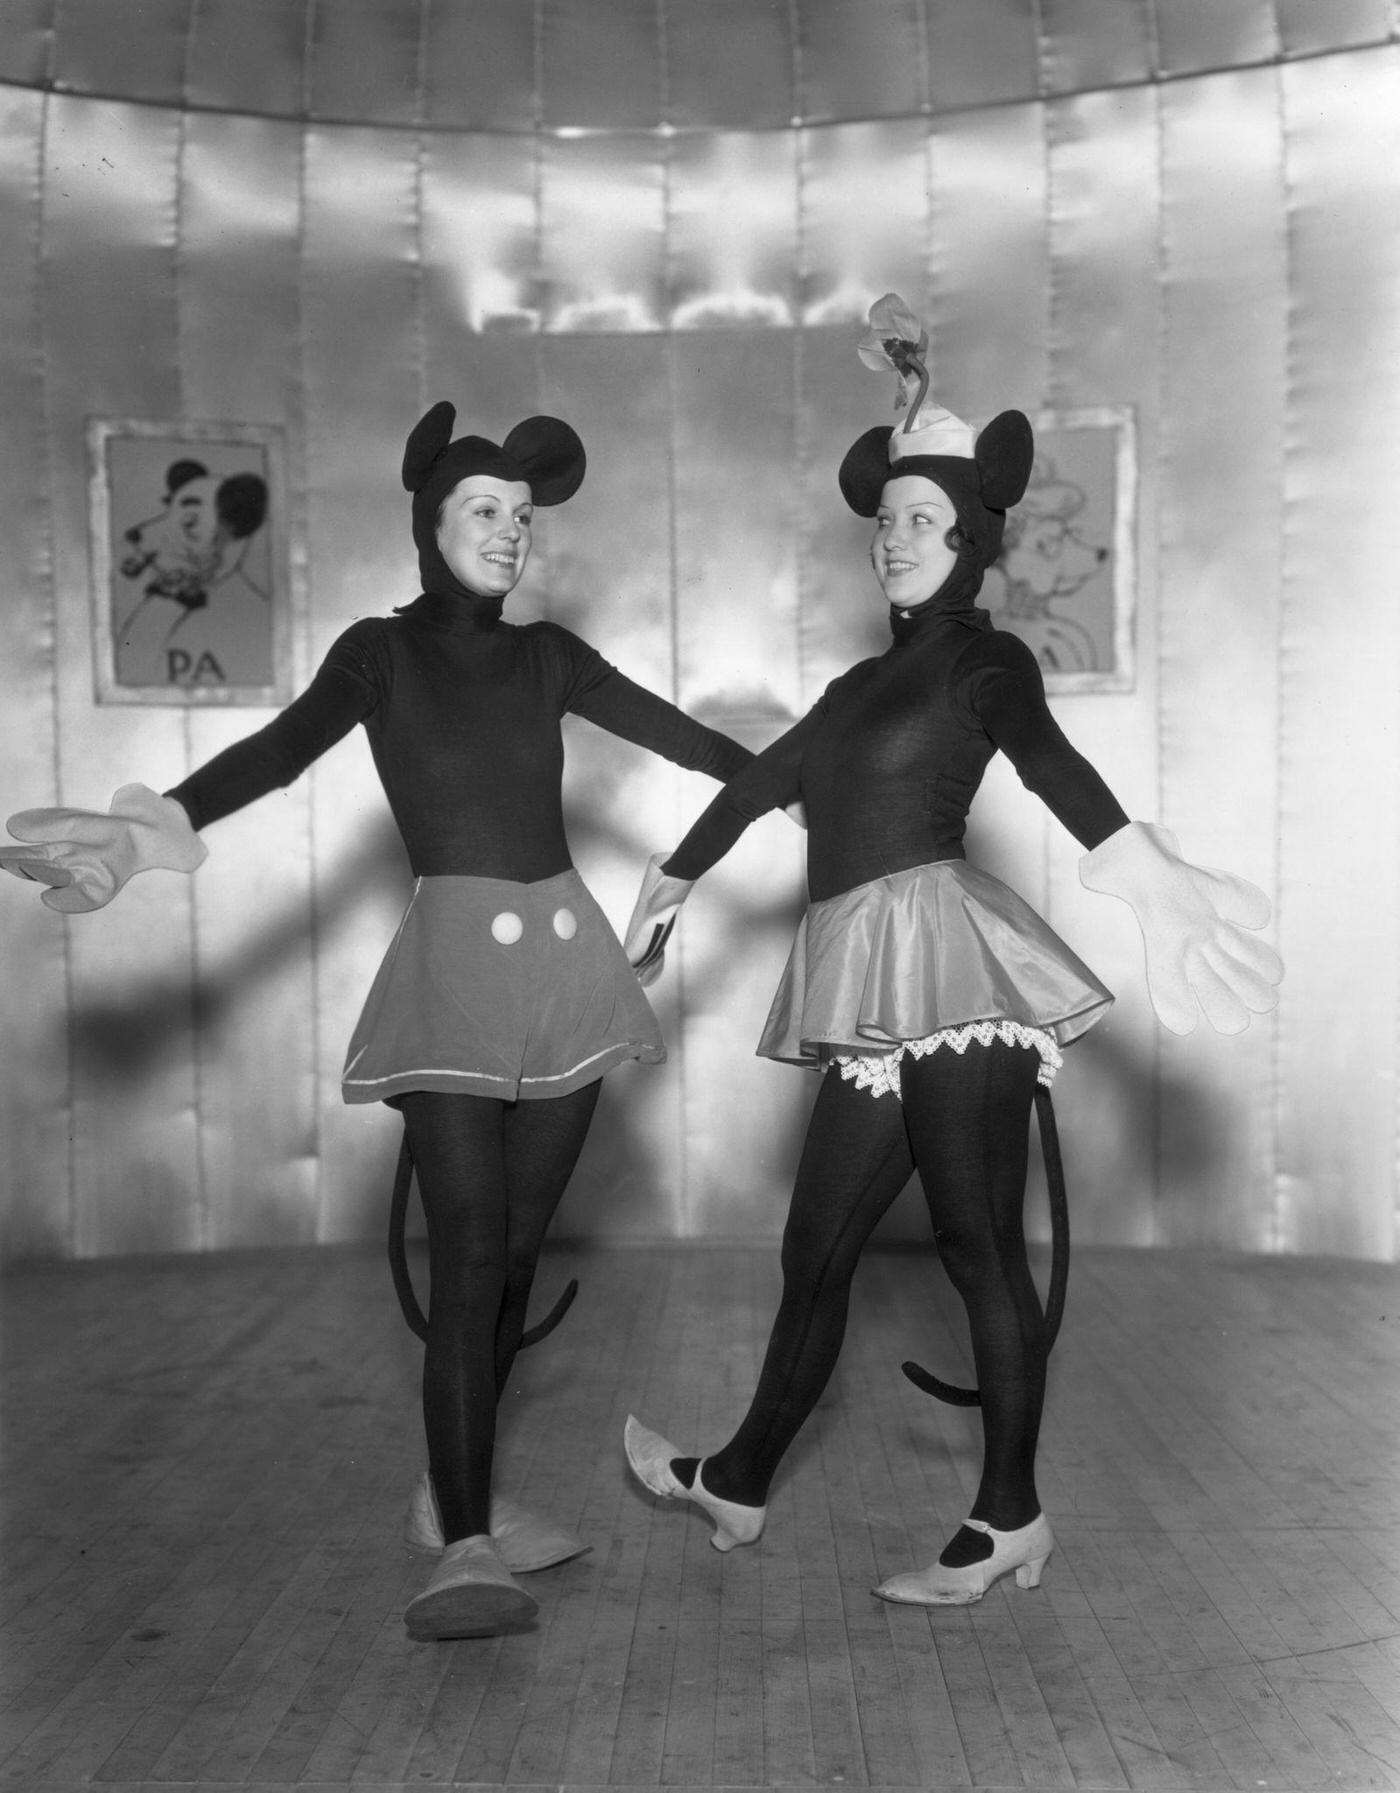 Hilda Knight and Evelyn Dall as Mickey and Minnie Mouse in a production of 'Monte Carlo Follies' at the Grosvenor House Hotel, London, 1934.